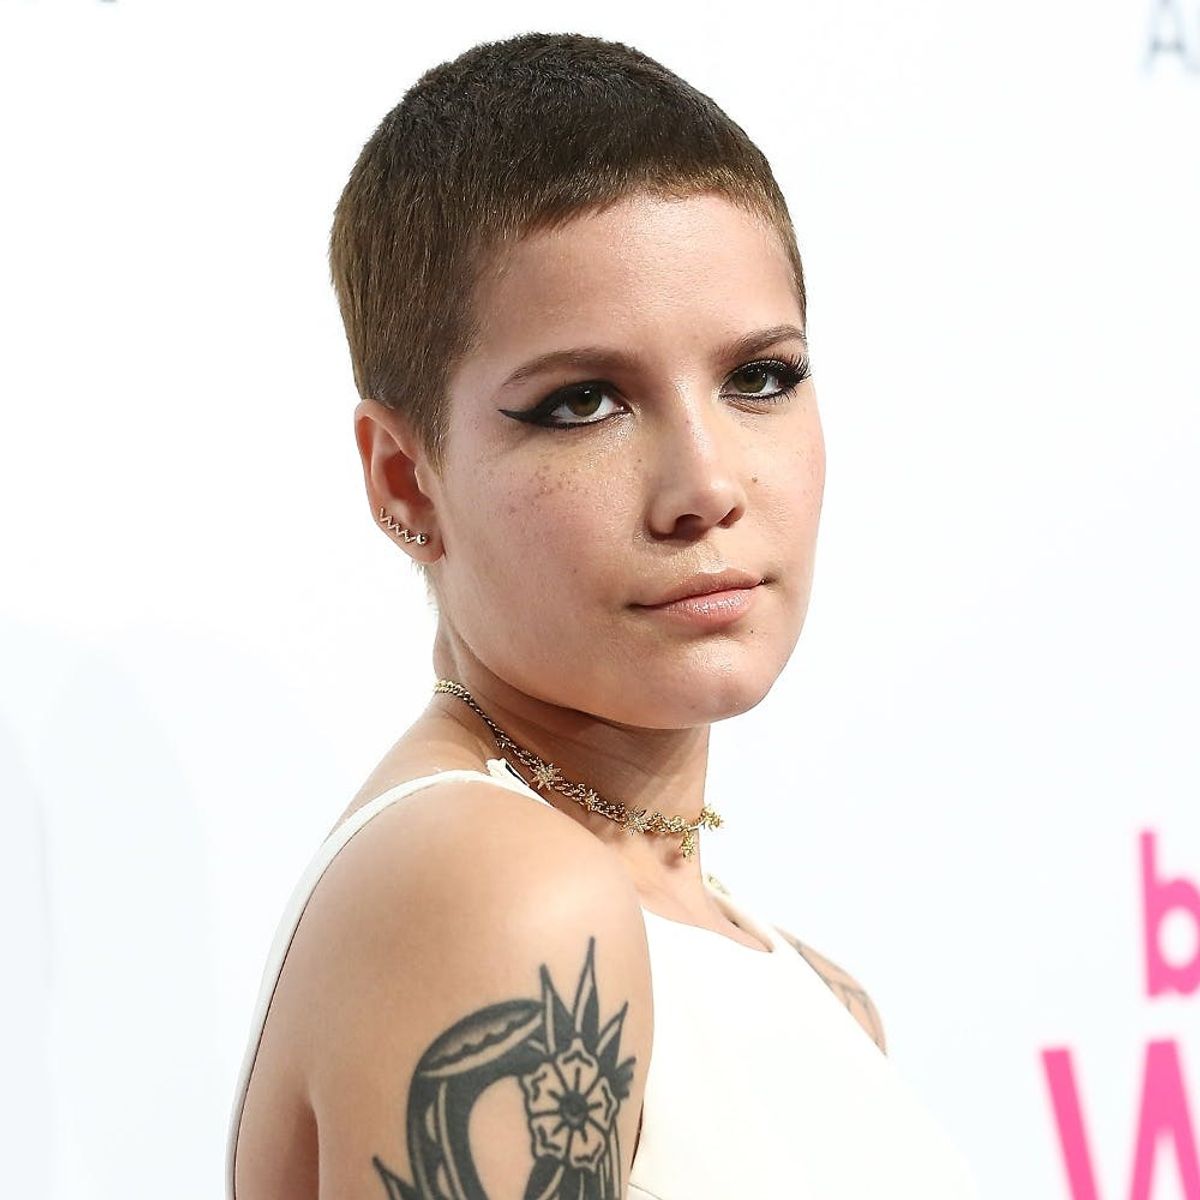 Halsey Just Donated $100,000 to Planned Parenthood Because of This Tweet